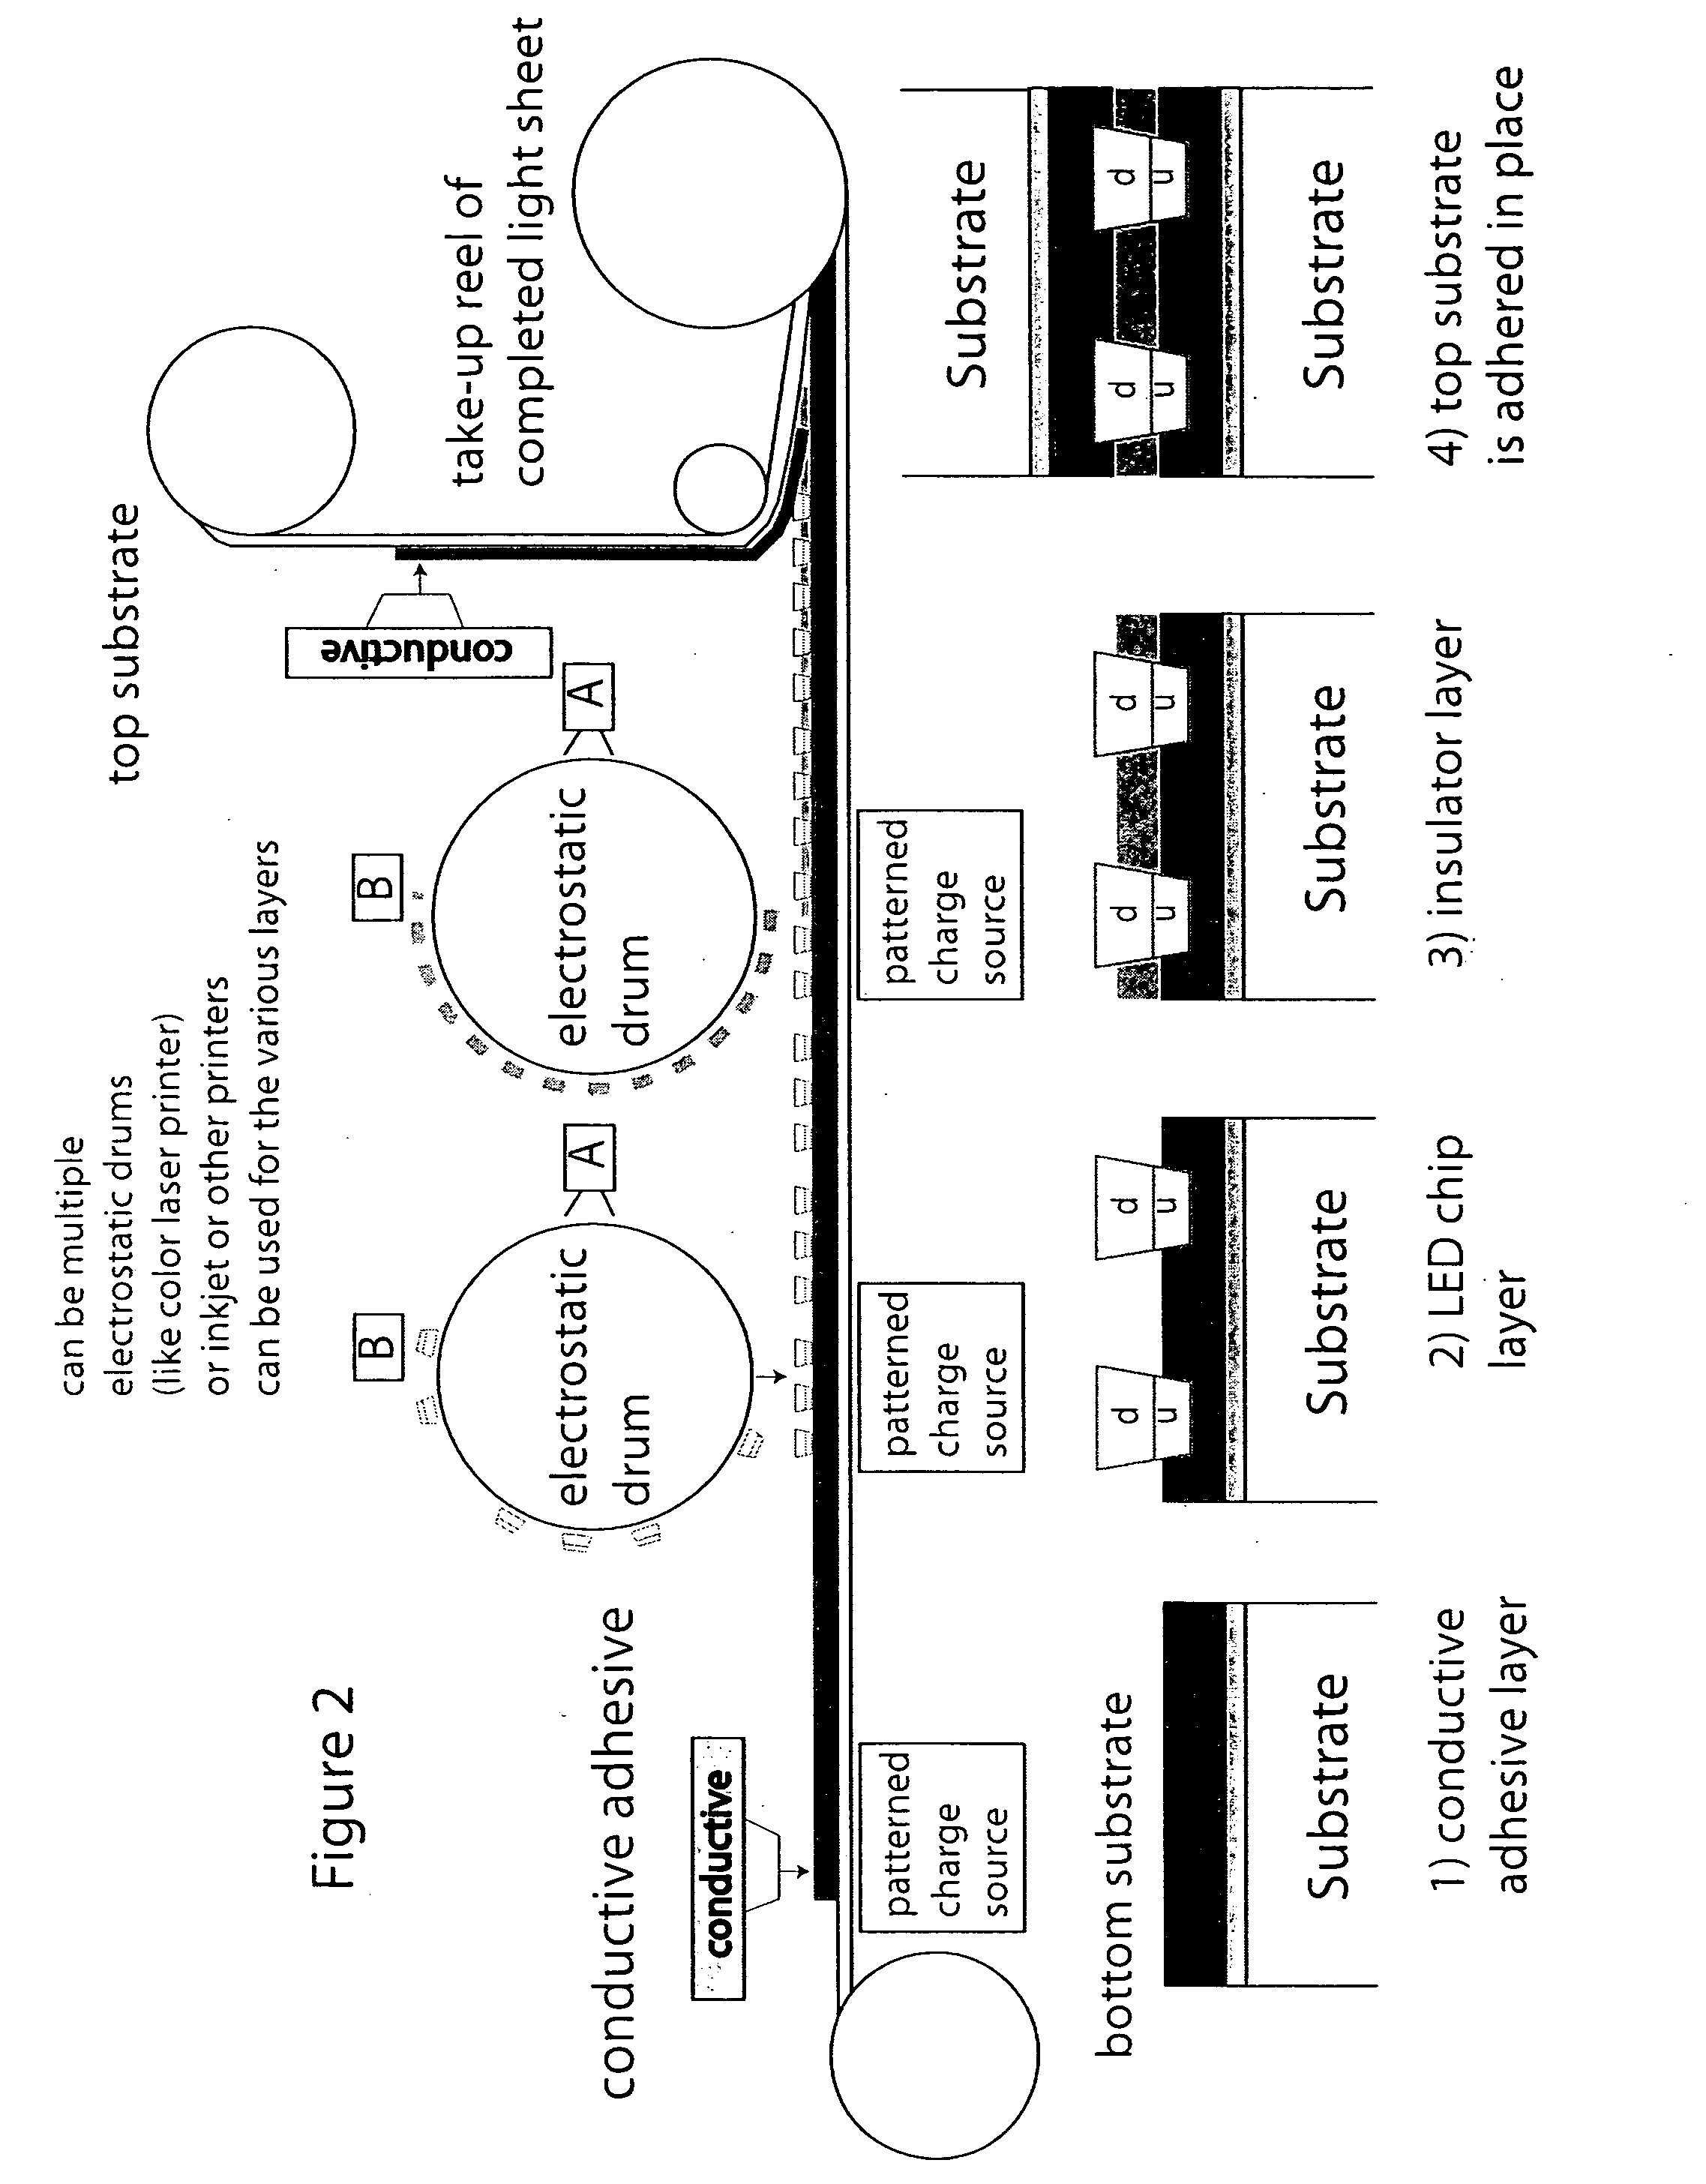 Roll-to-roll fabricated encapsulated semiconductor circuit devices